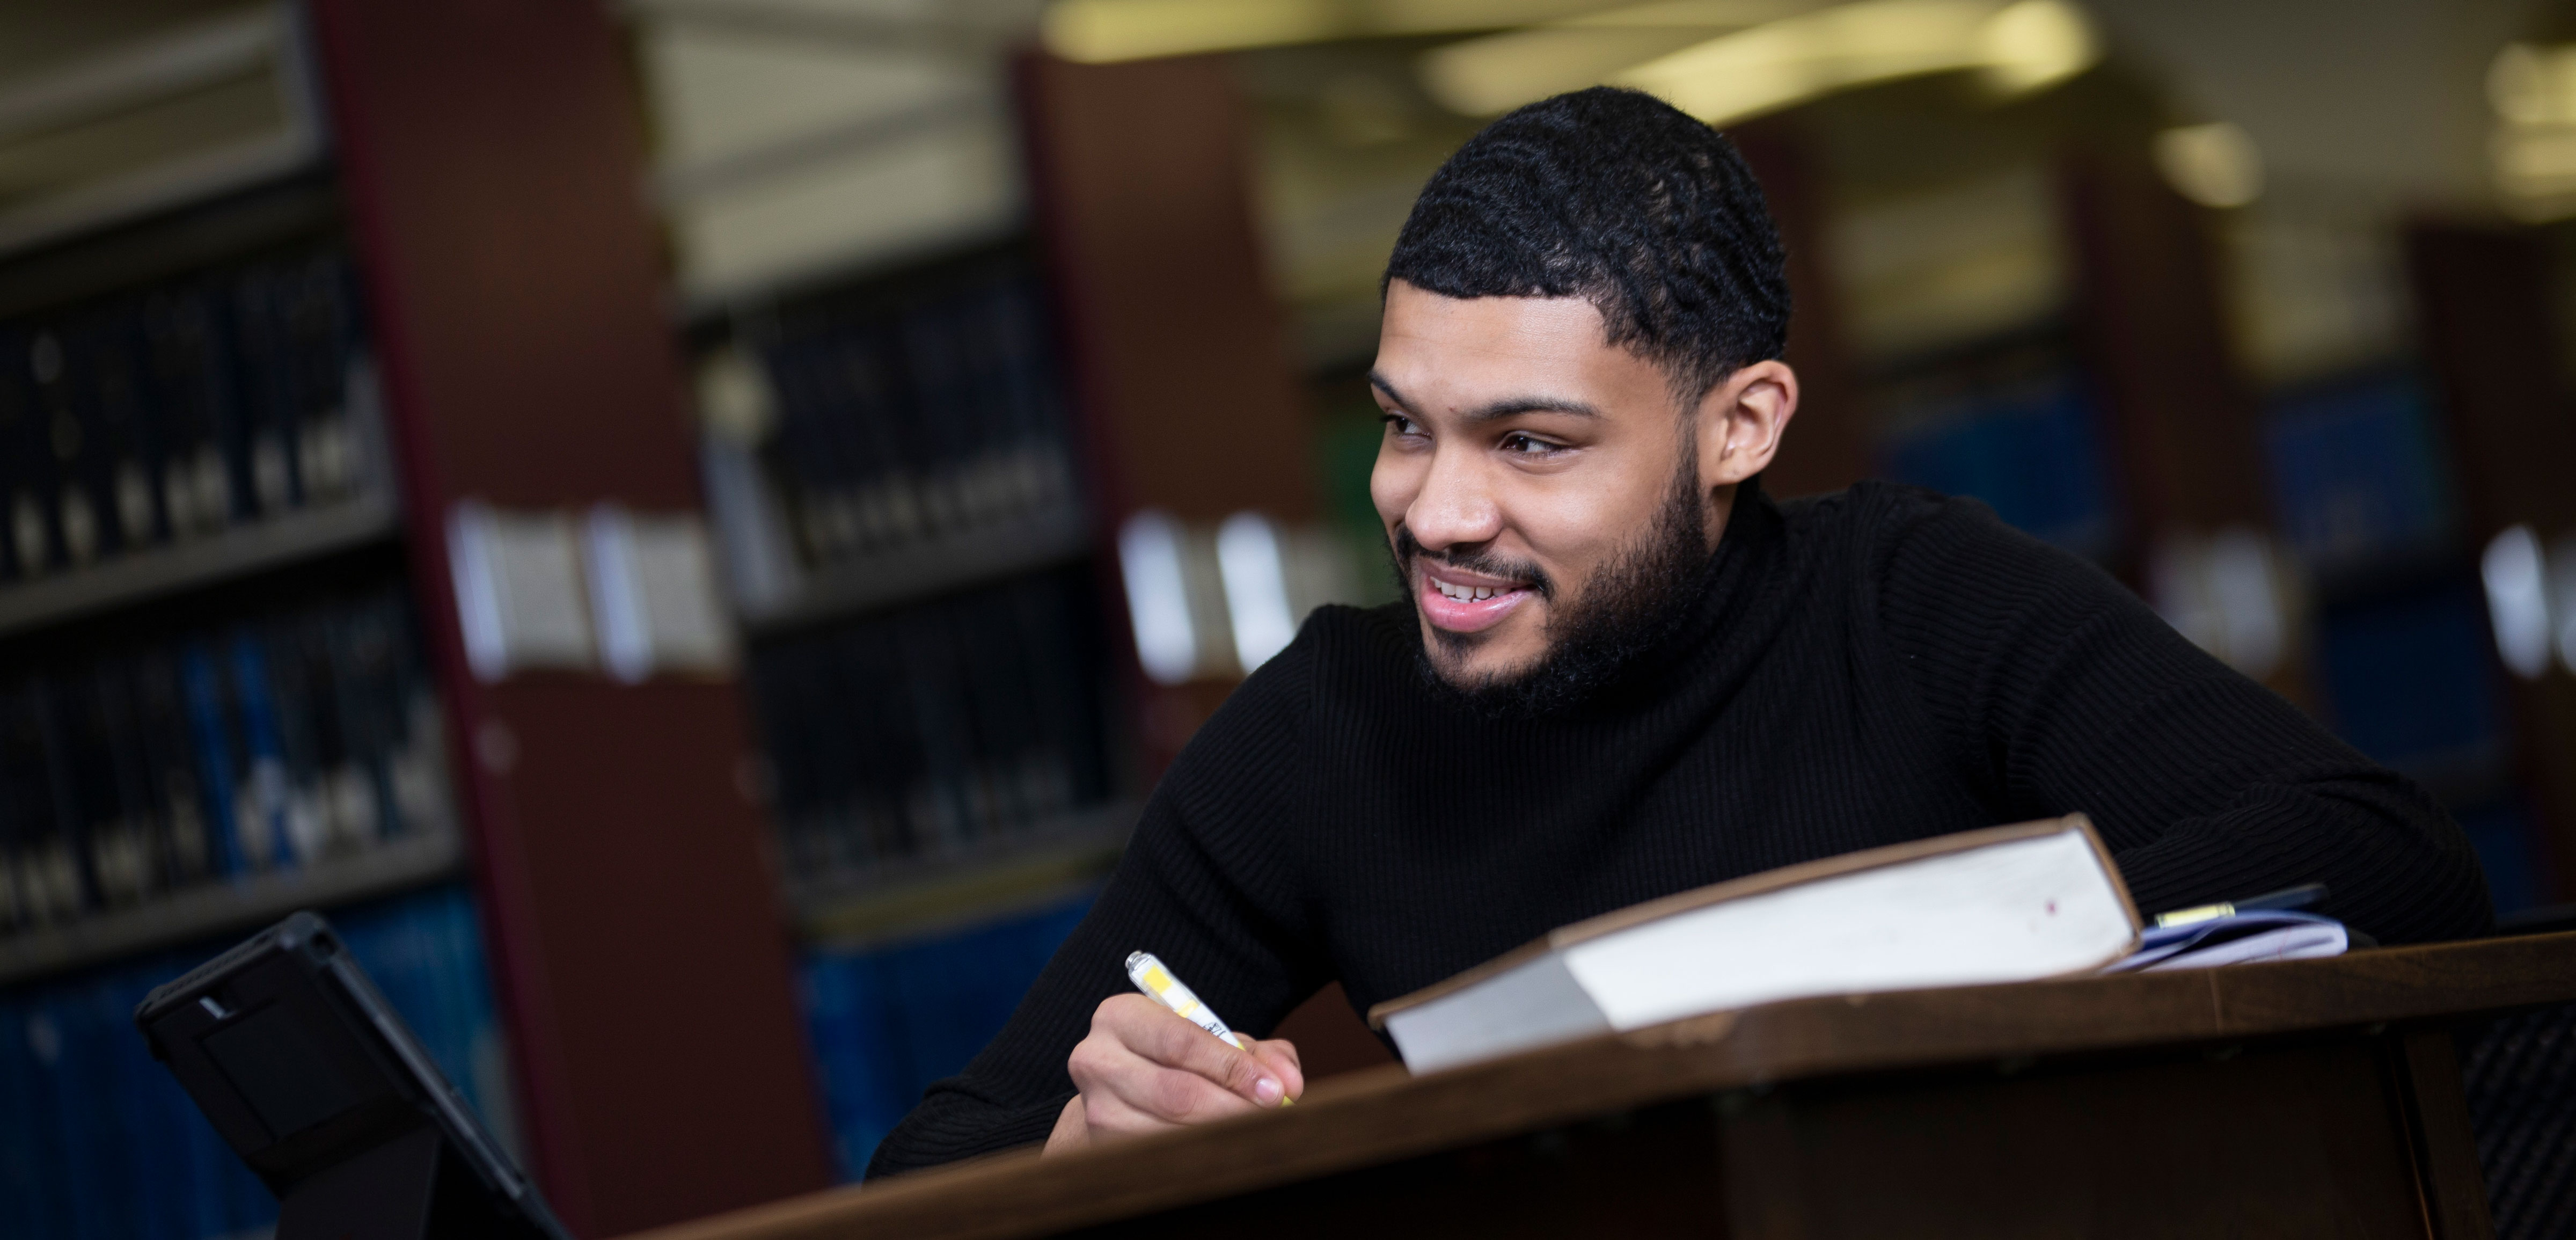 A smiling student sits at a desk in a library with notebooks and textbooks open on the table..